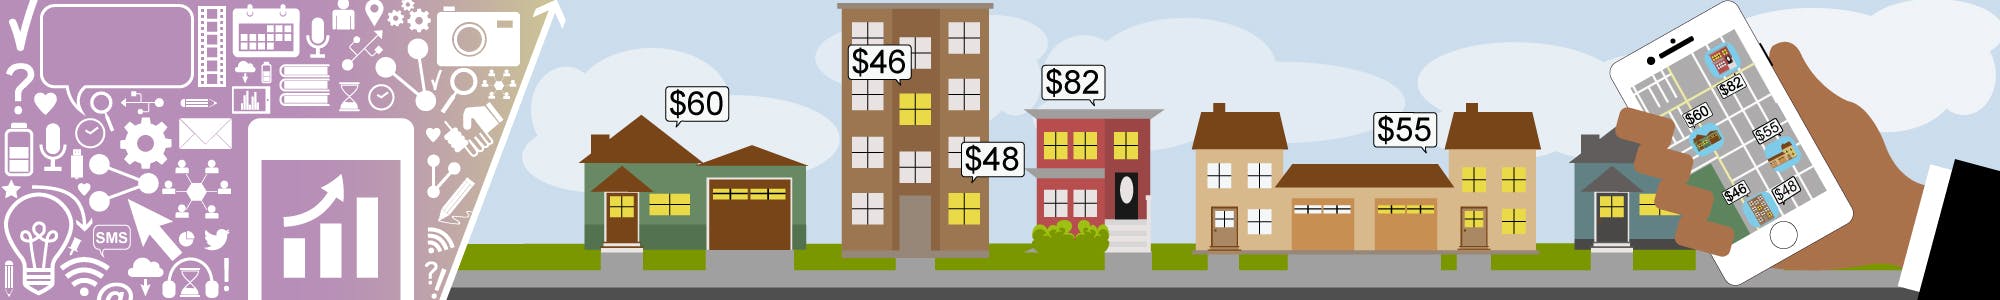 City street lined with potential short-term rental units and their respective prices as well as a hand holding a mobile phone with a short-term rental app displayed.